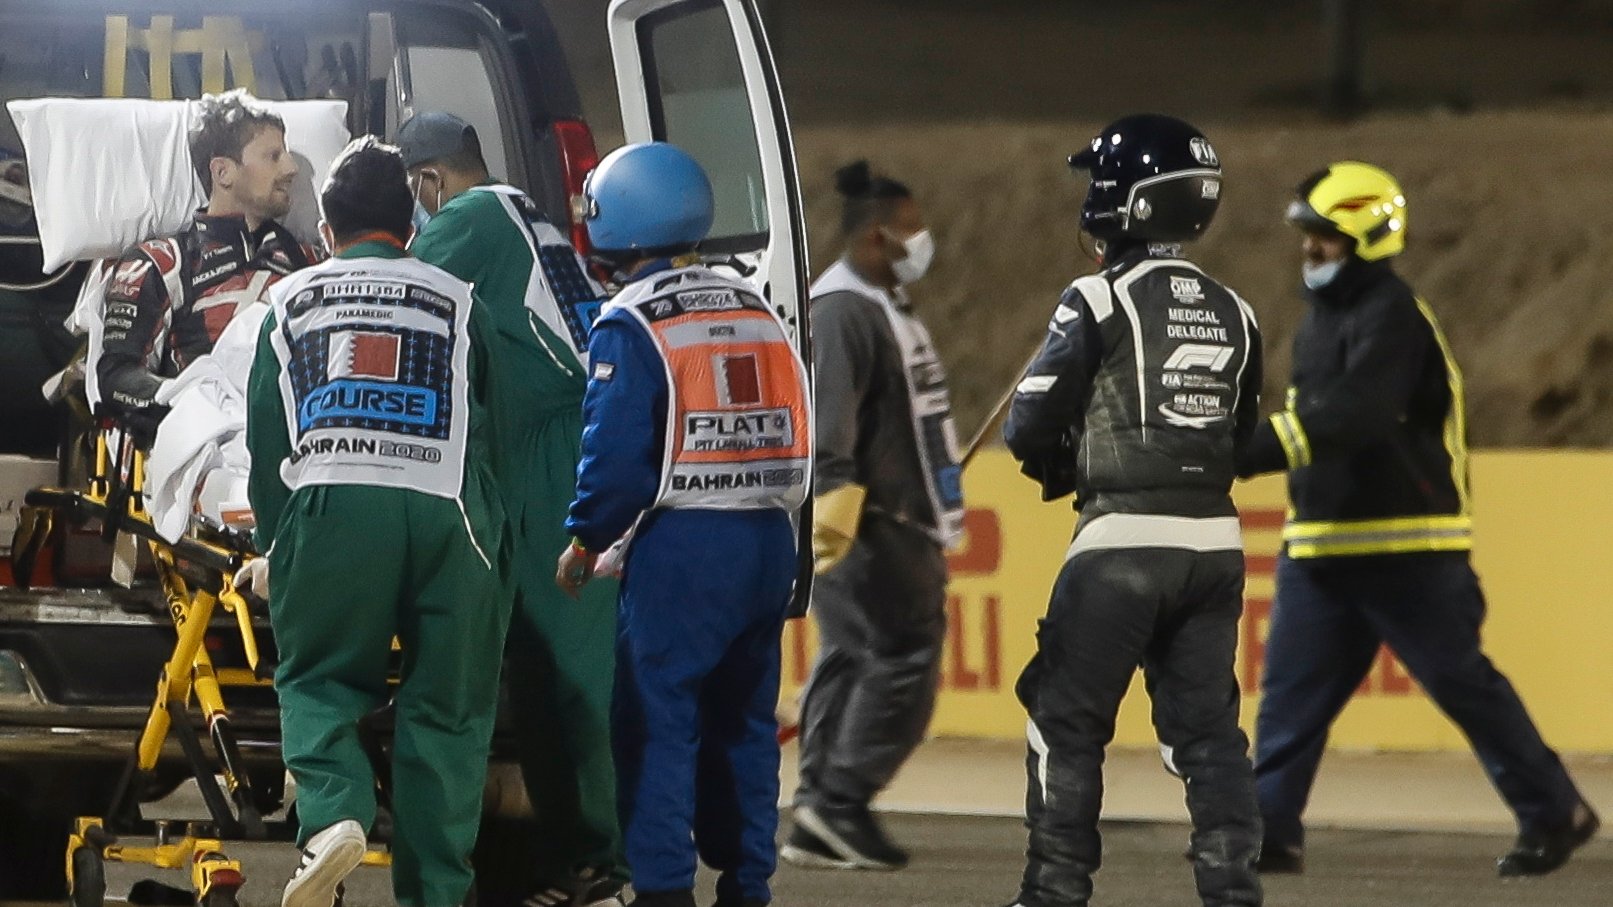 epa08851028 French Formula One driver Romain Grosjean (L) of the Haas F1 Team receives medical assistance after a crash during the start of the Formula One Grand of Bahrain on the Bahrain International Circuit in Sakhir, Bahrain 29 November 2020.  EPA/Hamad I Mohamed / Pool